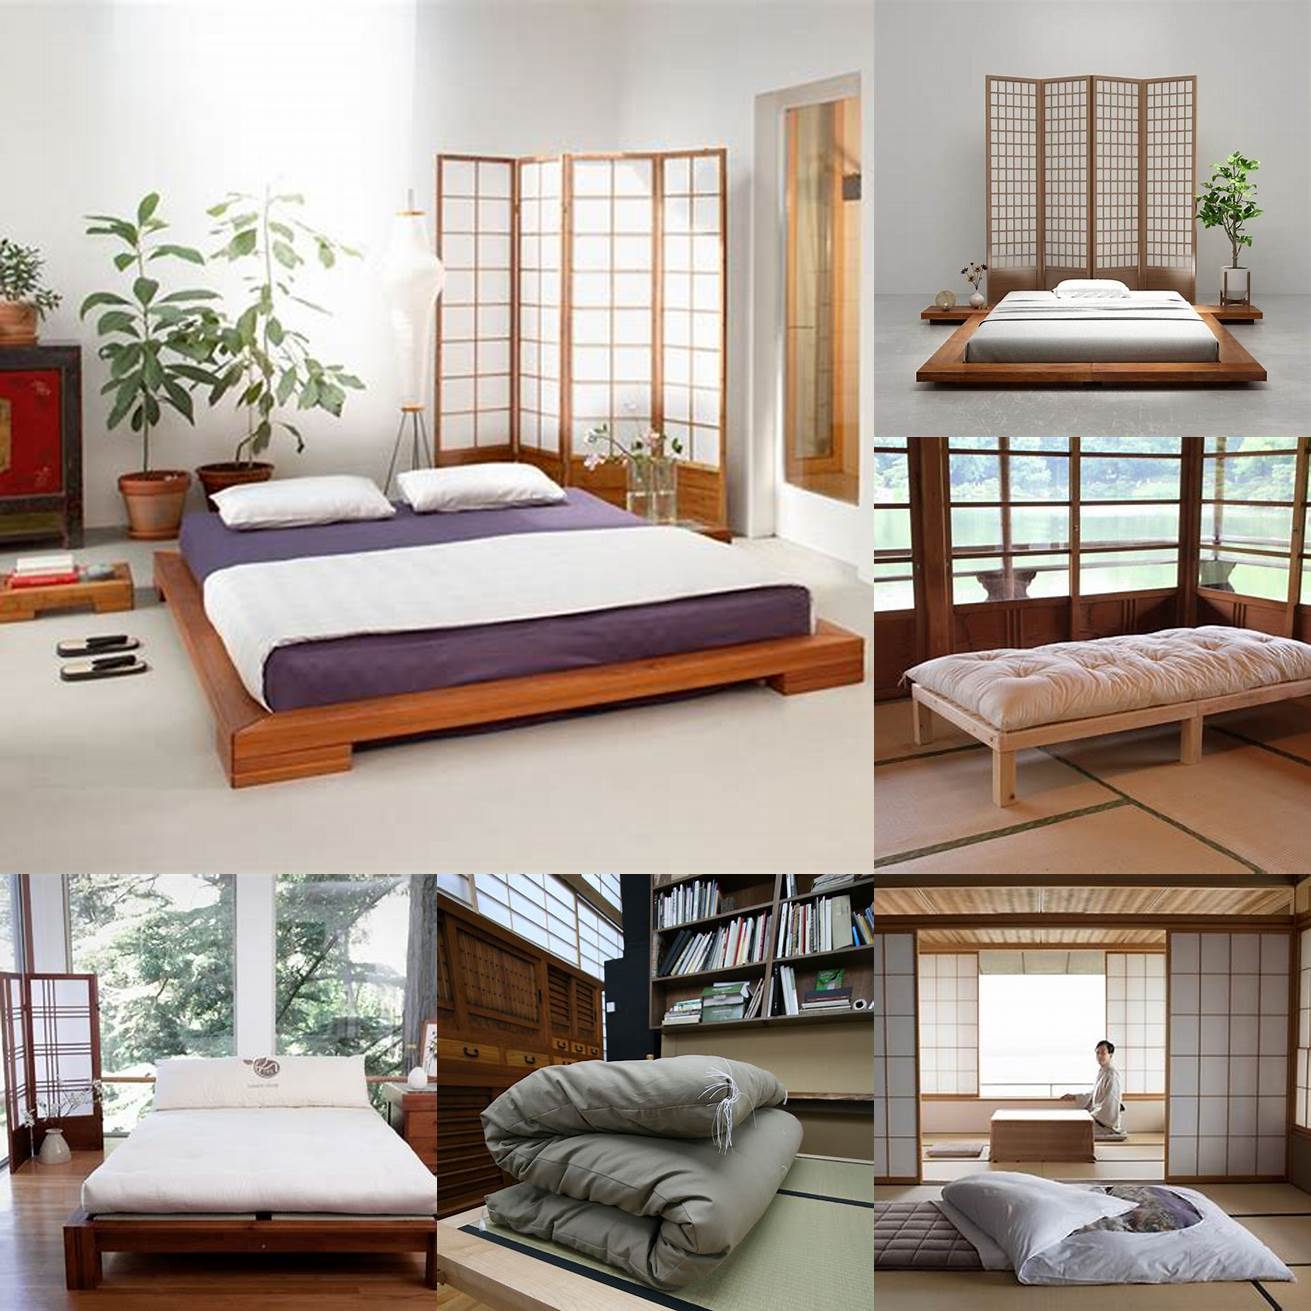 A tatami bed with a wooden frame and traditional Japanese futon bedding